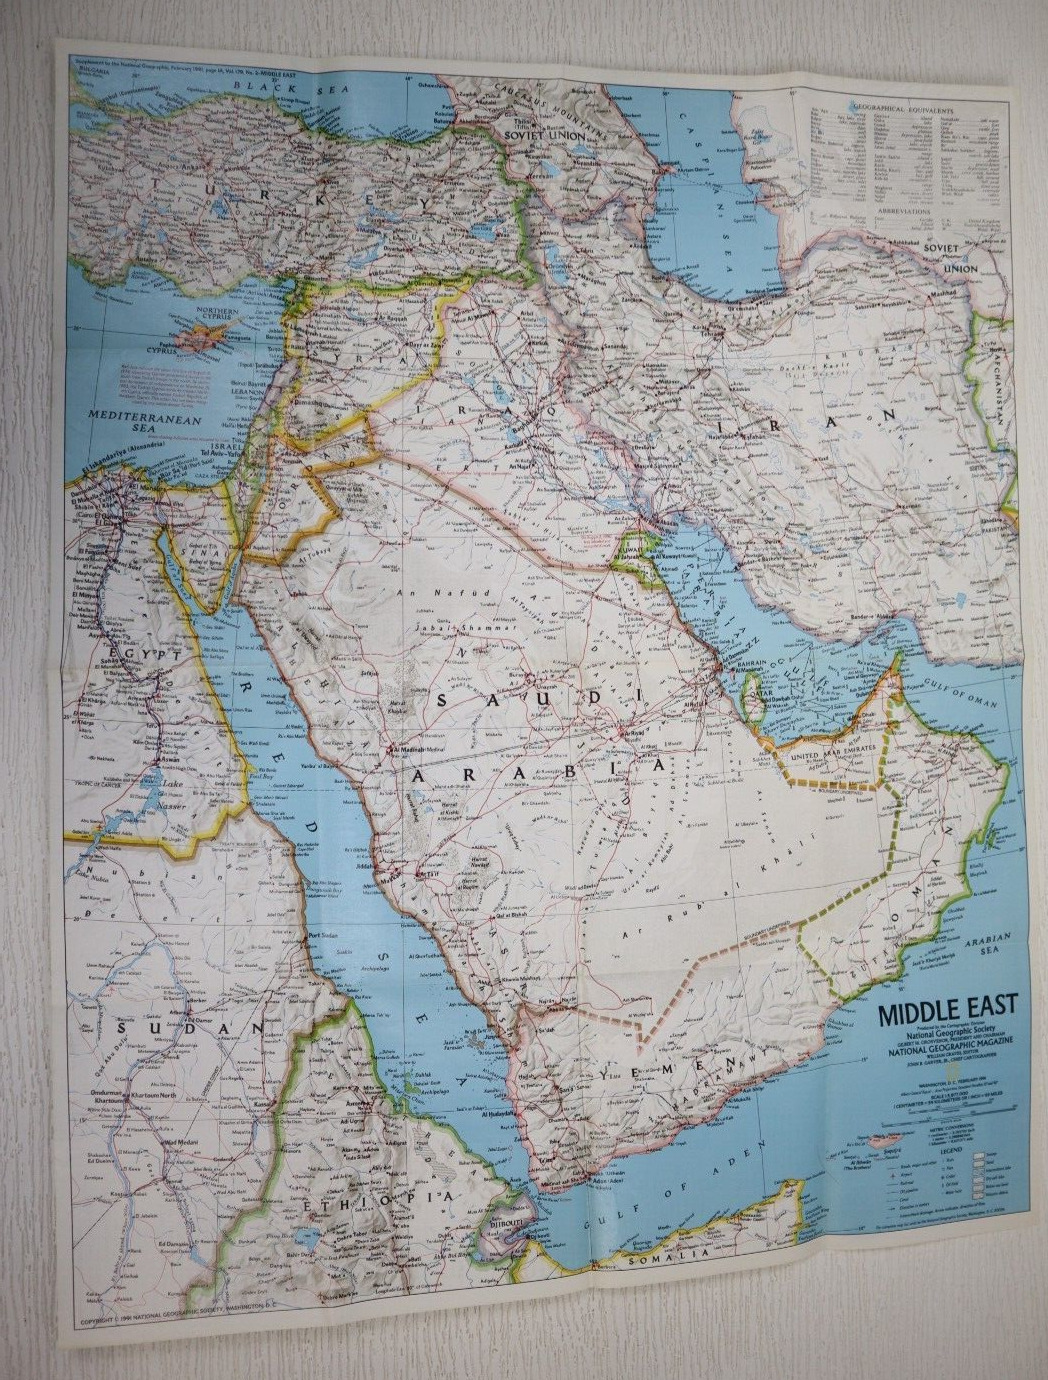 Middle East States in Turmoil - National Geographic  Double-sided Poster MAP 91